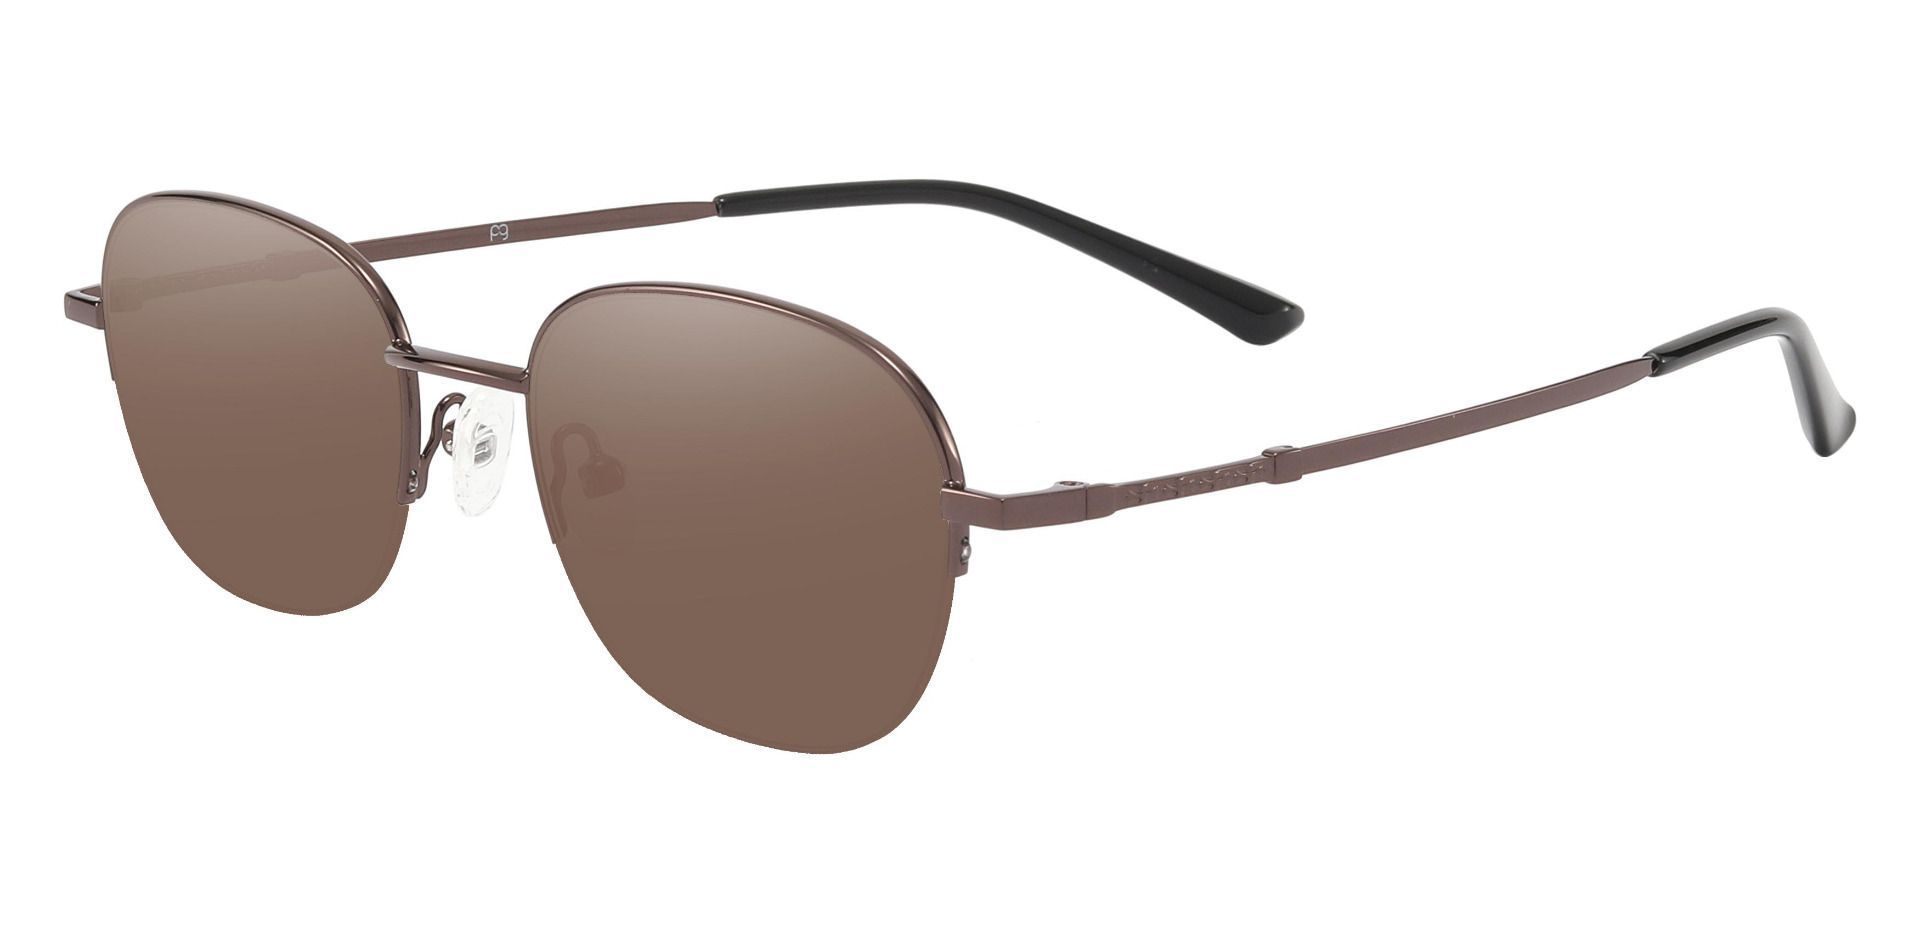 Rochester Oval Reading Sunglasses - Brown Frame With Brown Lenses